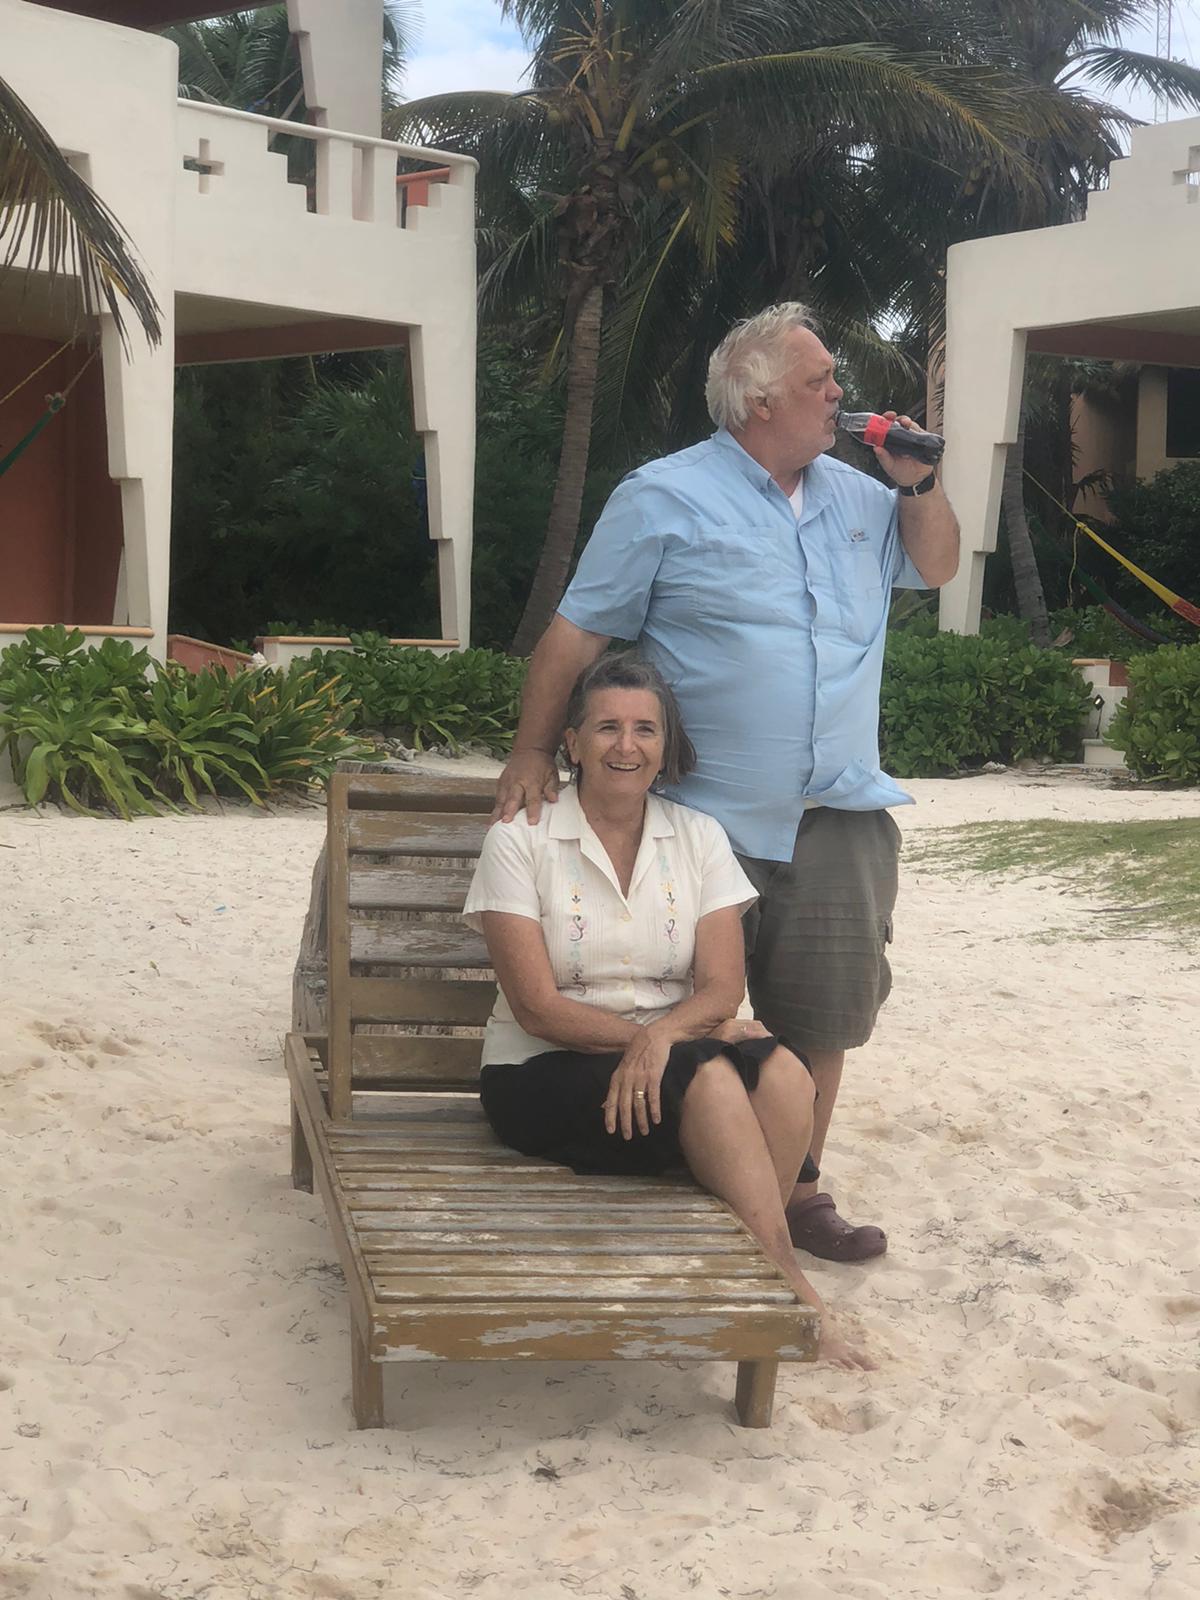 Kim and Marcia Bales, owners of Mayan Beach Garden